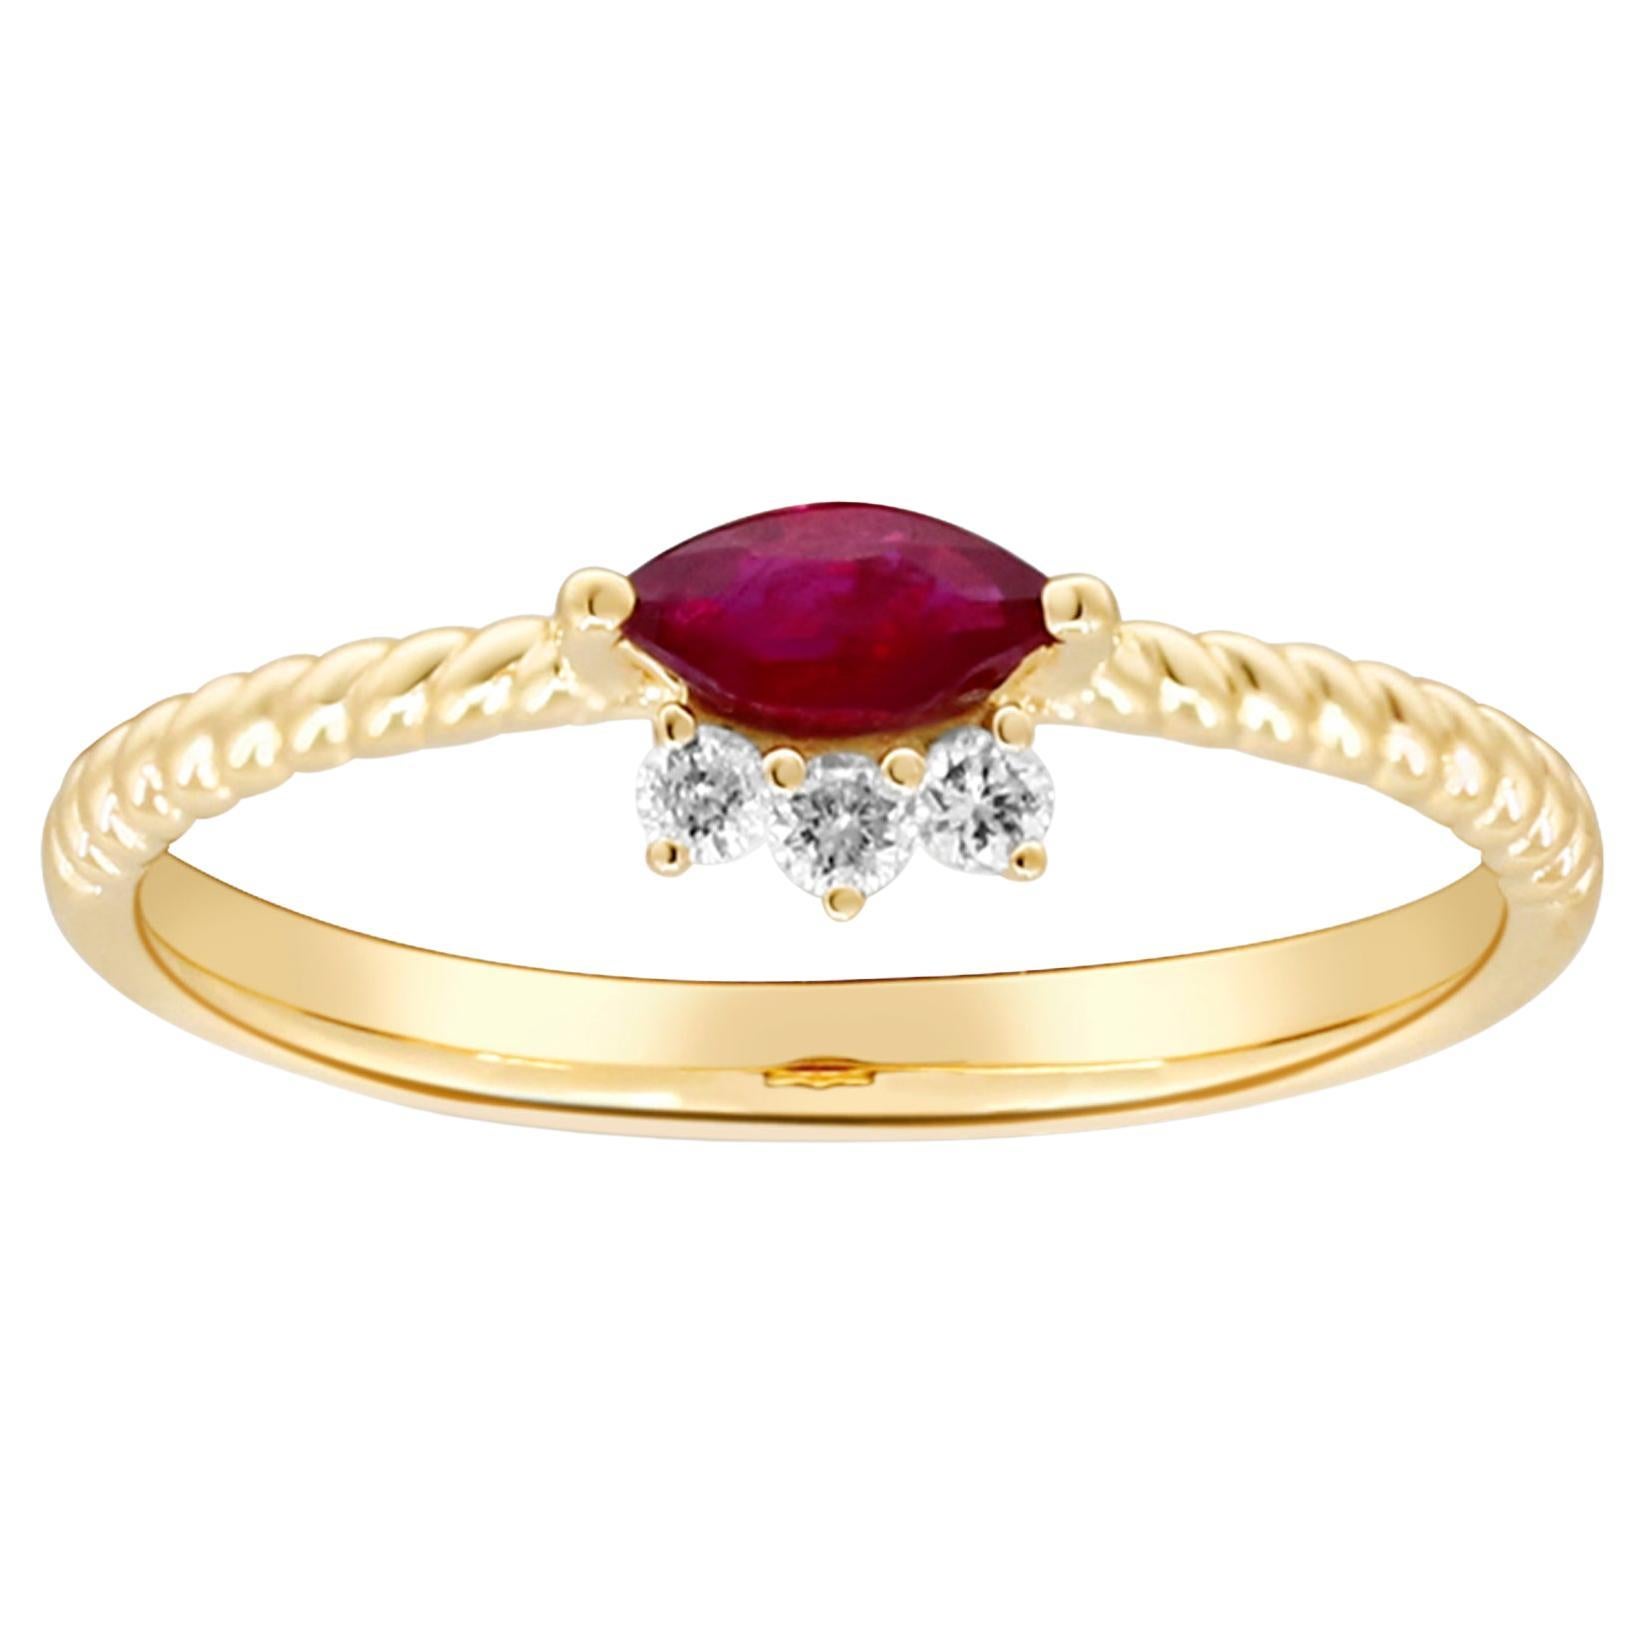 0.28 Carat Marquise-Cut Ruby with Diamond Accents 14K Yellow Gold Ring For Sale